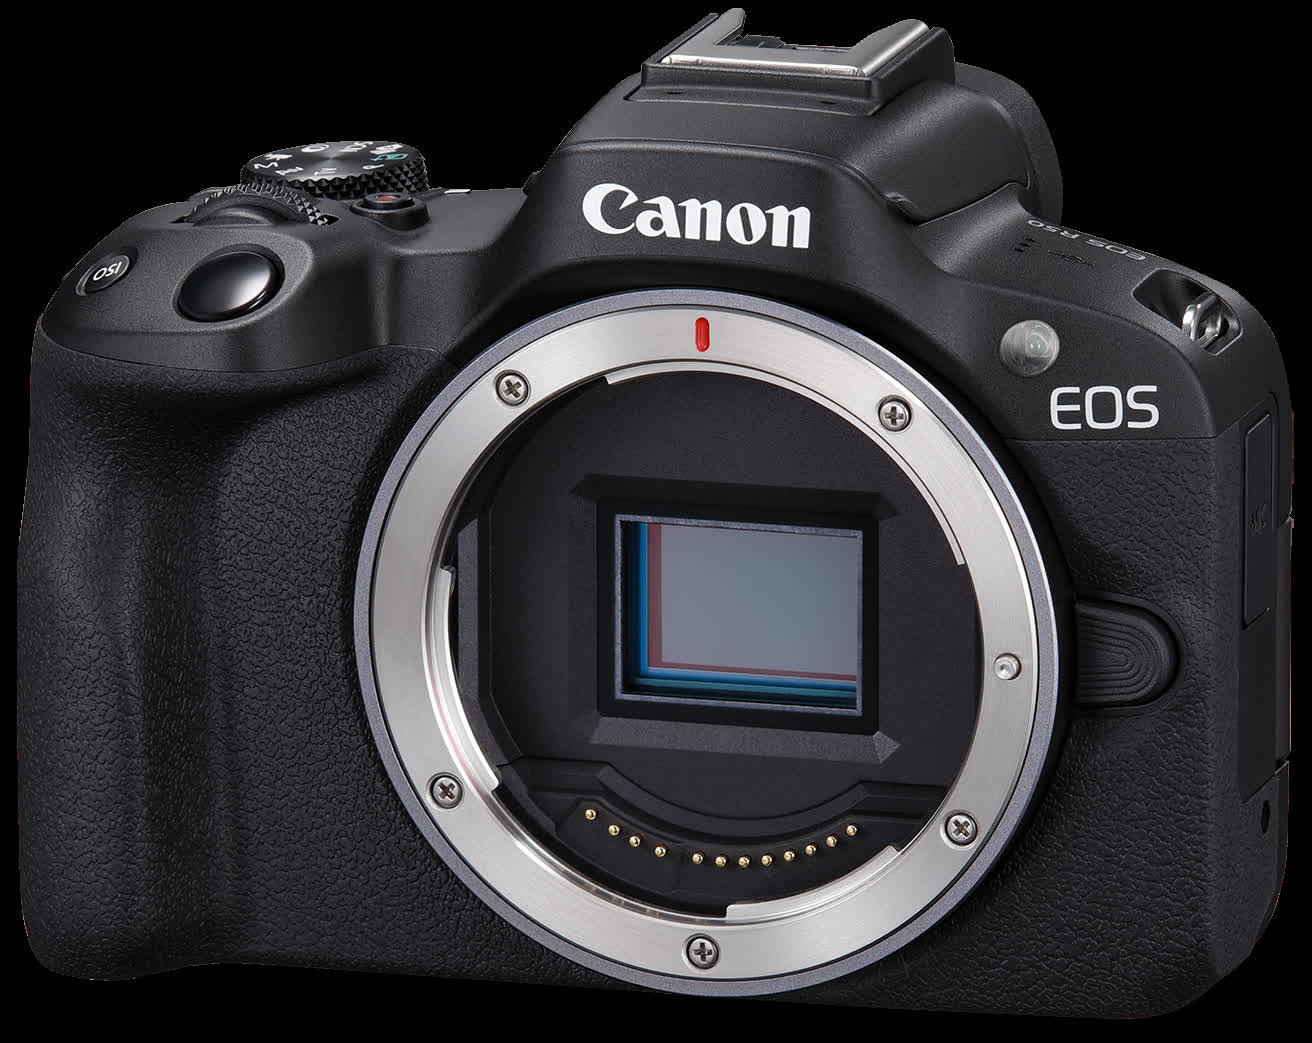 Canon introduces the EOS R50, its new entry-level mirrorless camera